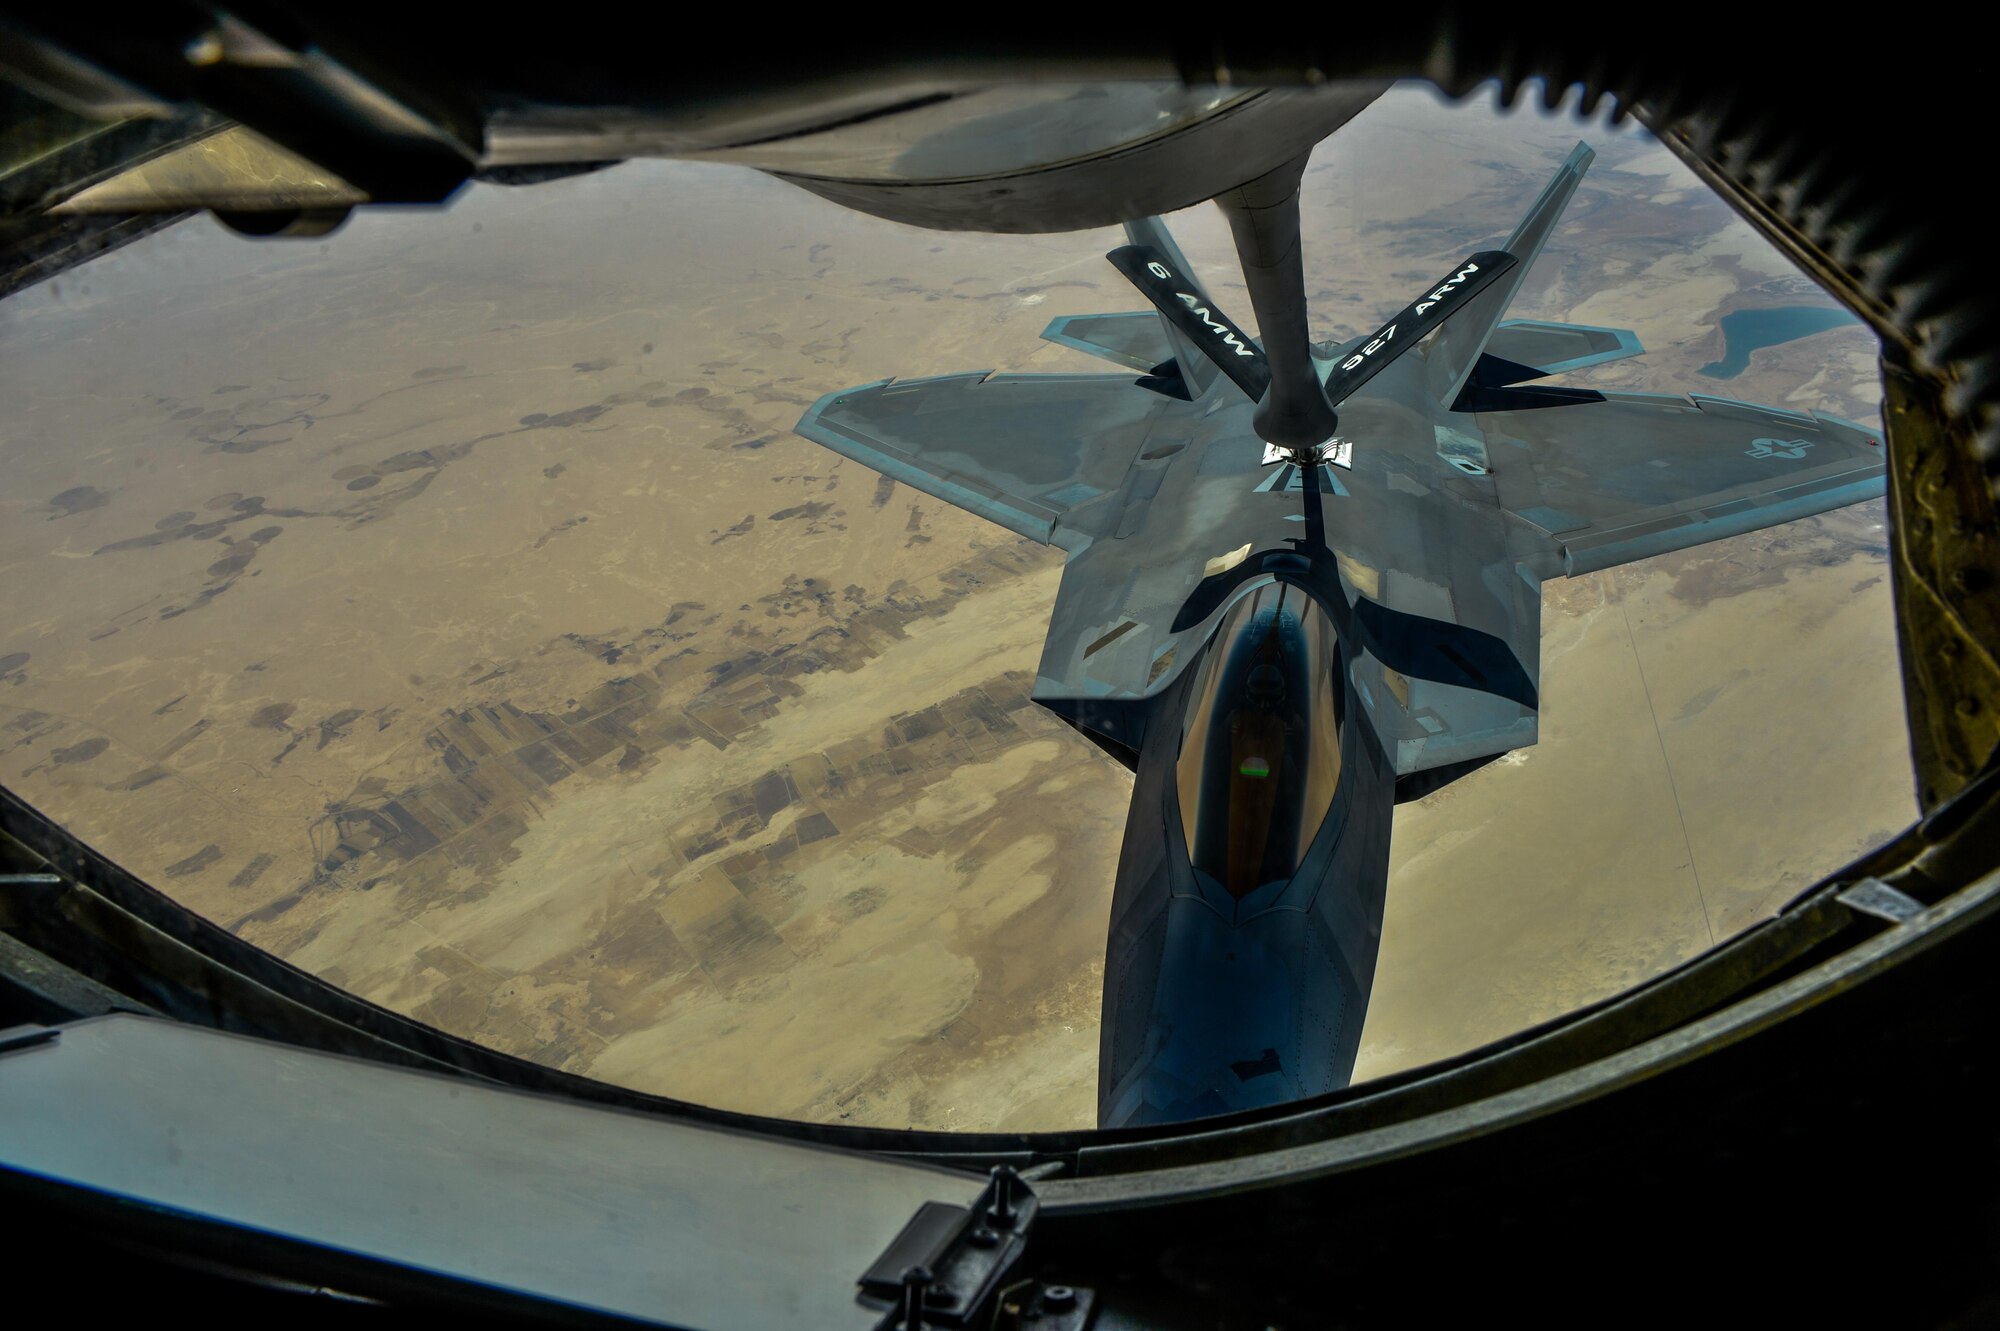 An F-22 Raptor receives fuel from a KC-135 Stratotanker assigned to the 340th Expeditionary Air Refueling Squadron during a mission in support of Operation Inherent Resolve, June 20, 2017. The F-22 is a component of the Global Strike Task Force, supporting U.S. and coalition forces working to liberate territory and people under the control of ISIS. (U.S. Air Force photo by Staff Sgt. Michael Battles)